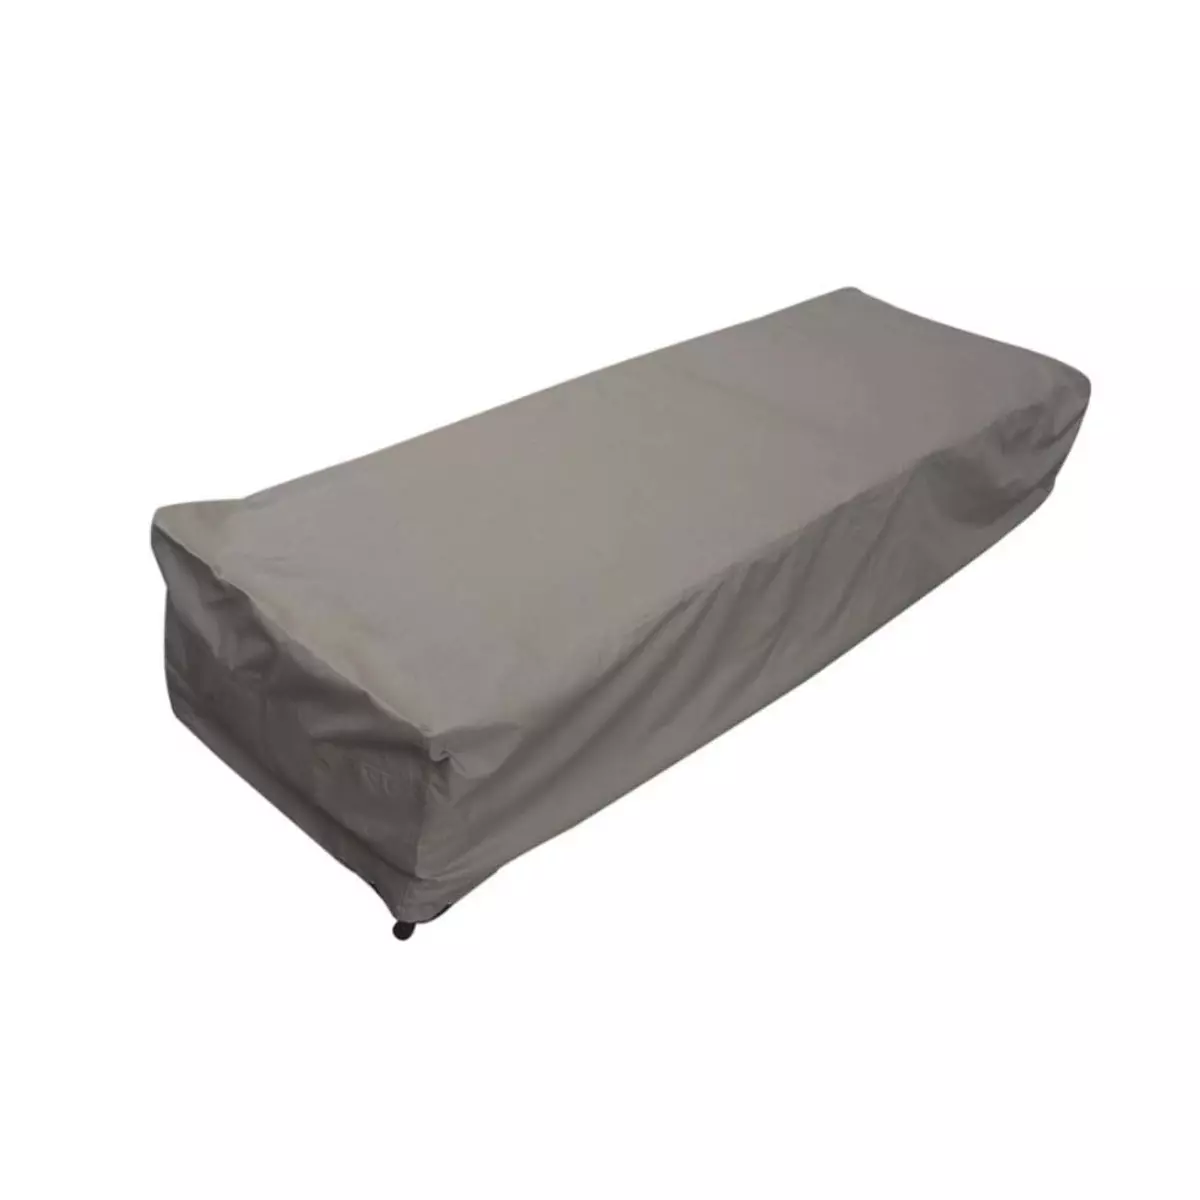 Protective Cover - Aluminium Sunlounger - image 1